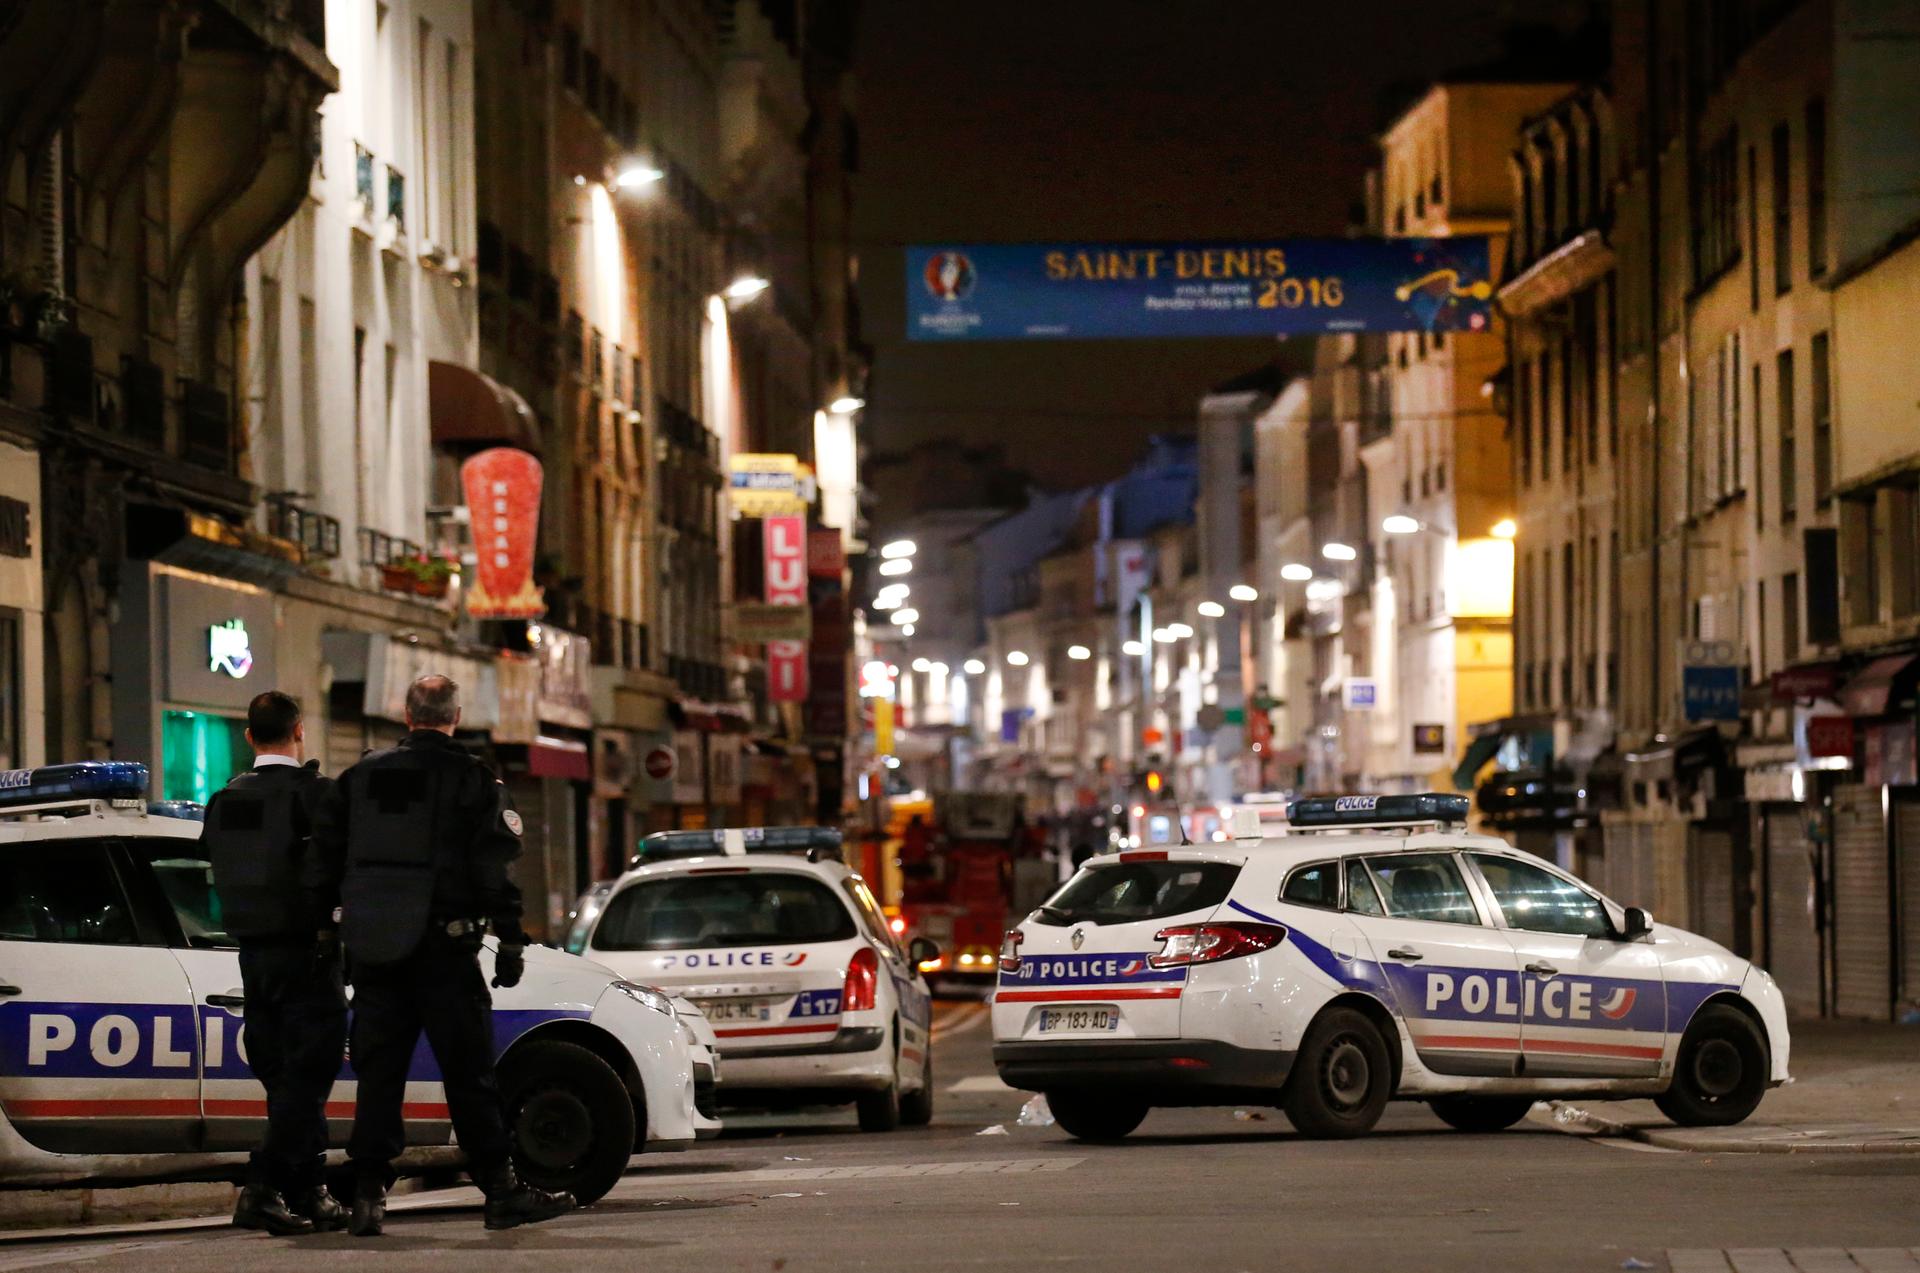 French police secure the area as shots are exchanged in Saint-Denis, France, near Paris, November 18, 2015 during an operation to catch fugitives from Friday night's deadly attacks in the French capital.